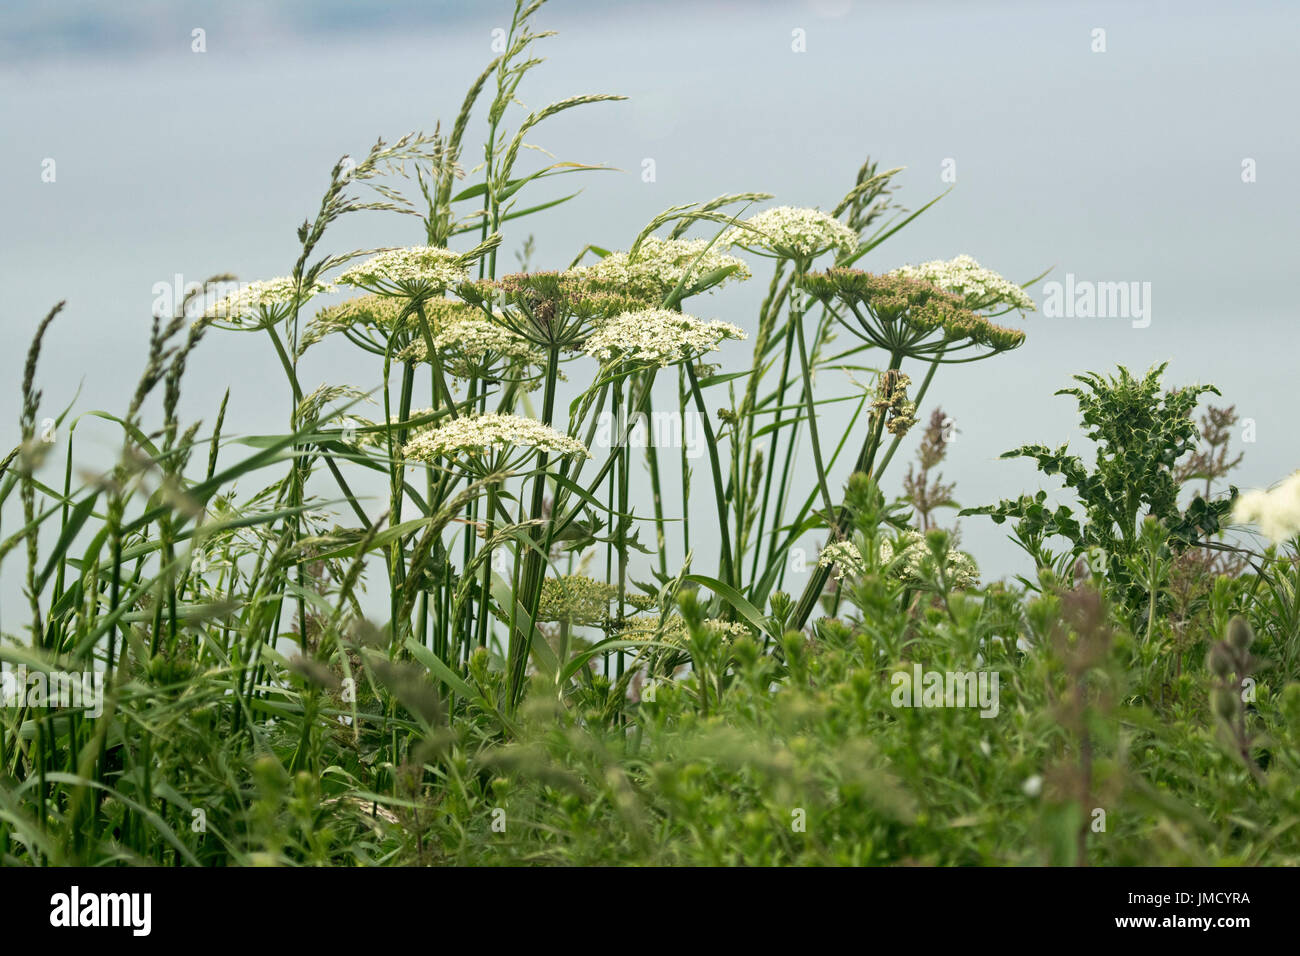 Cluster of white flowers of cow parsley, Anthriscus sylvestris, against light blue sky Stock Photo